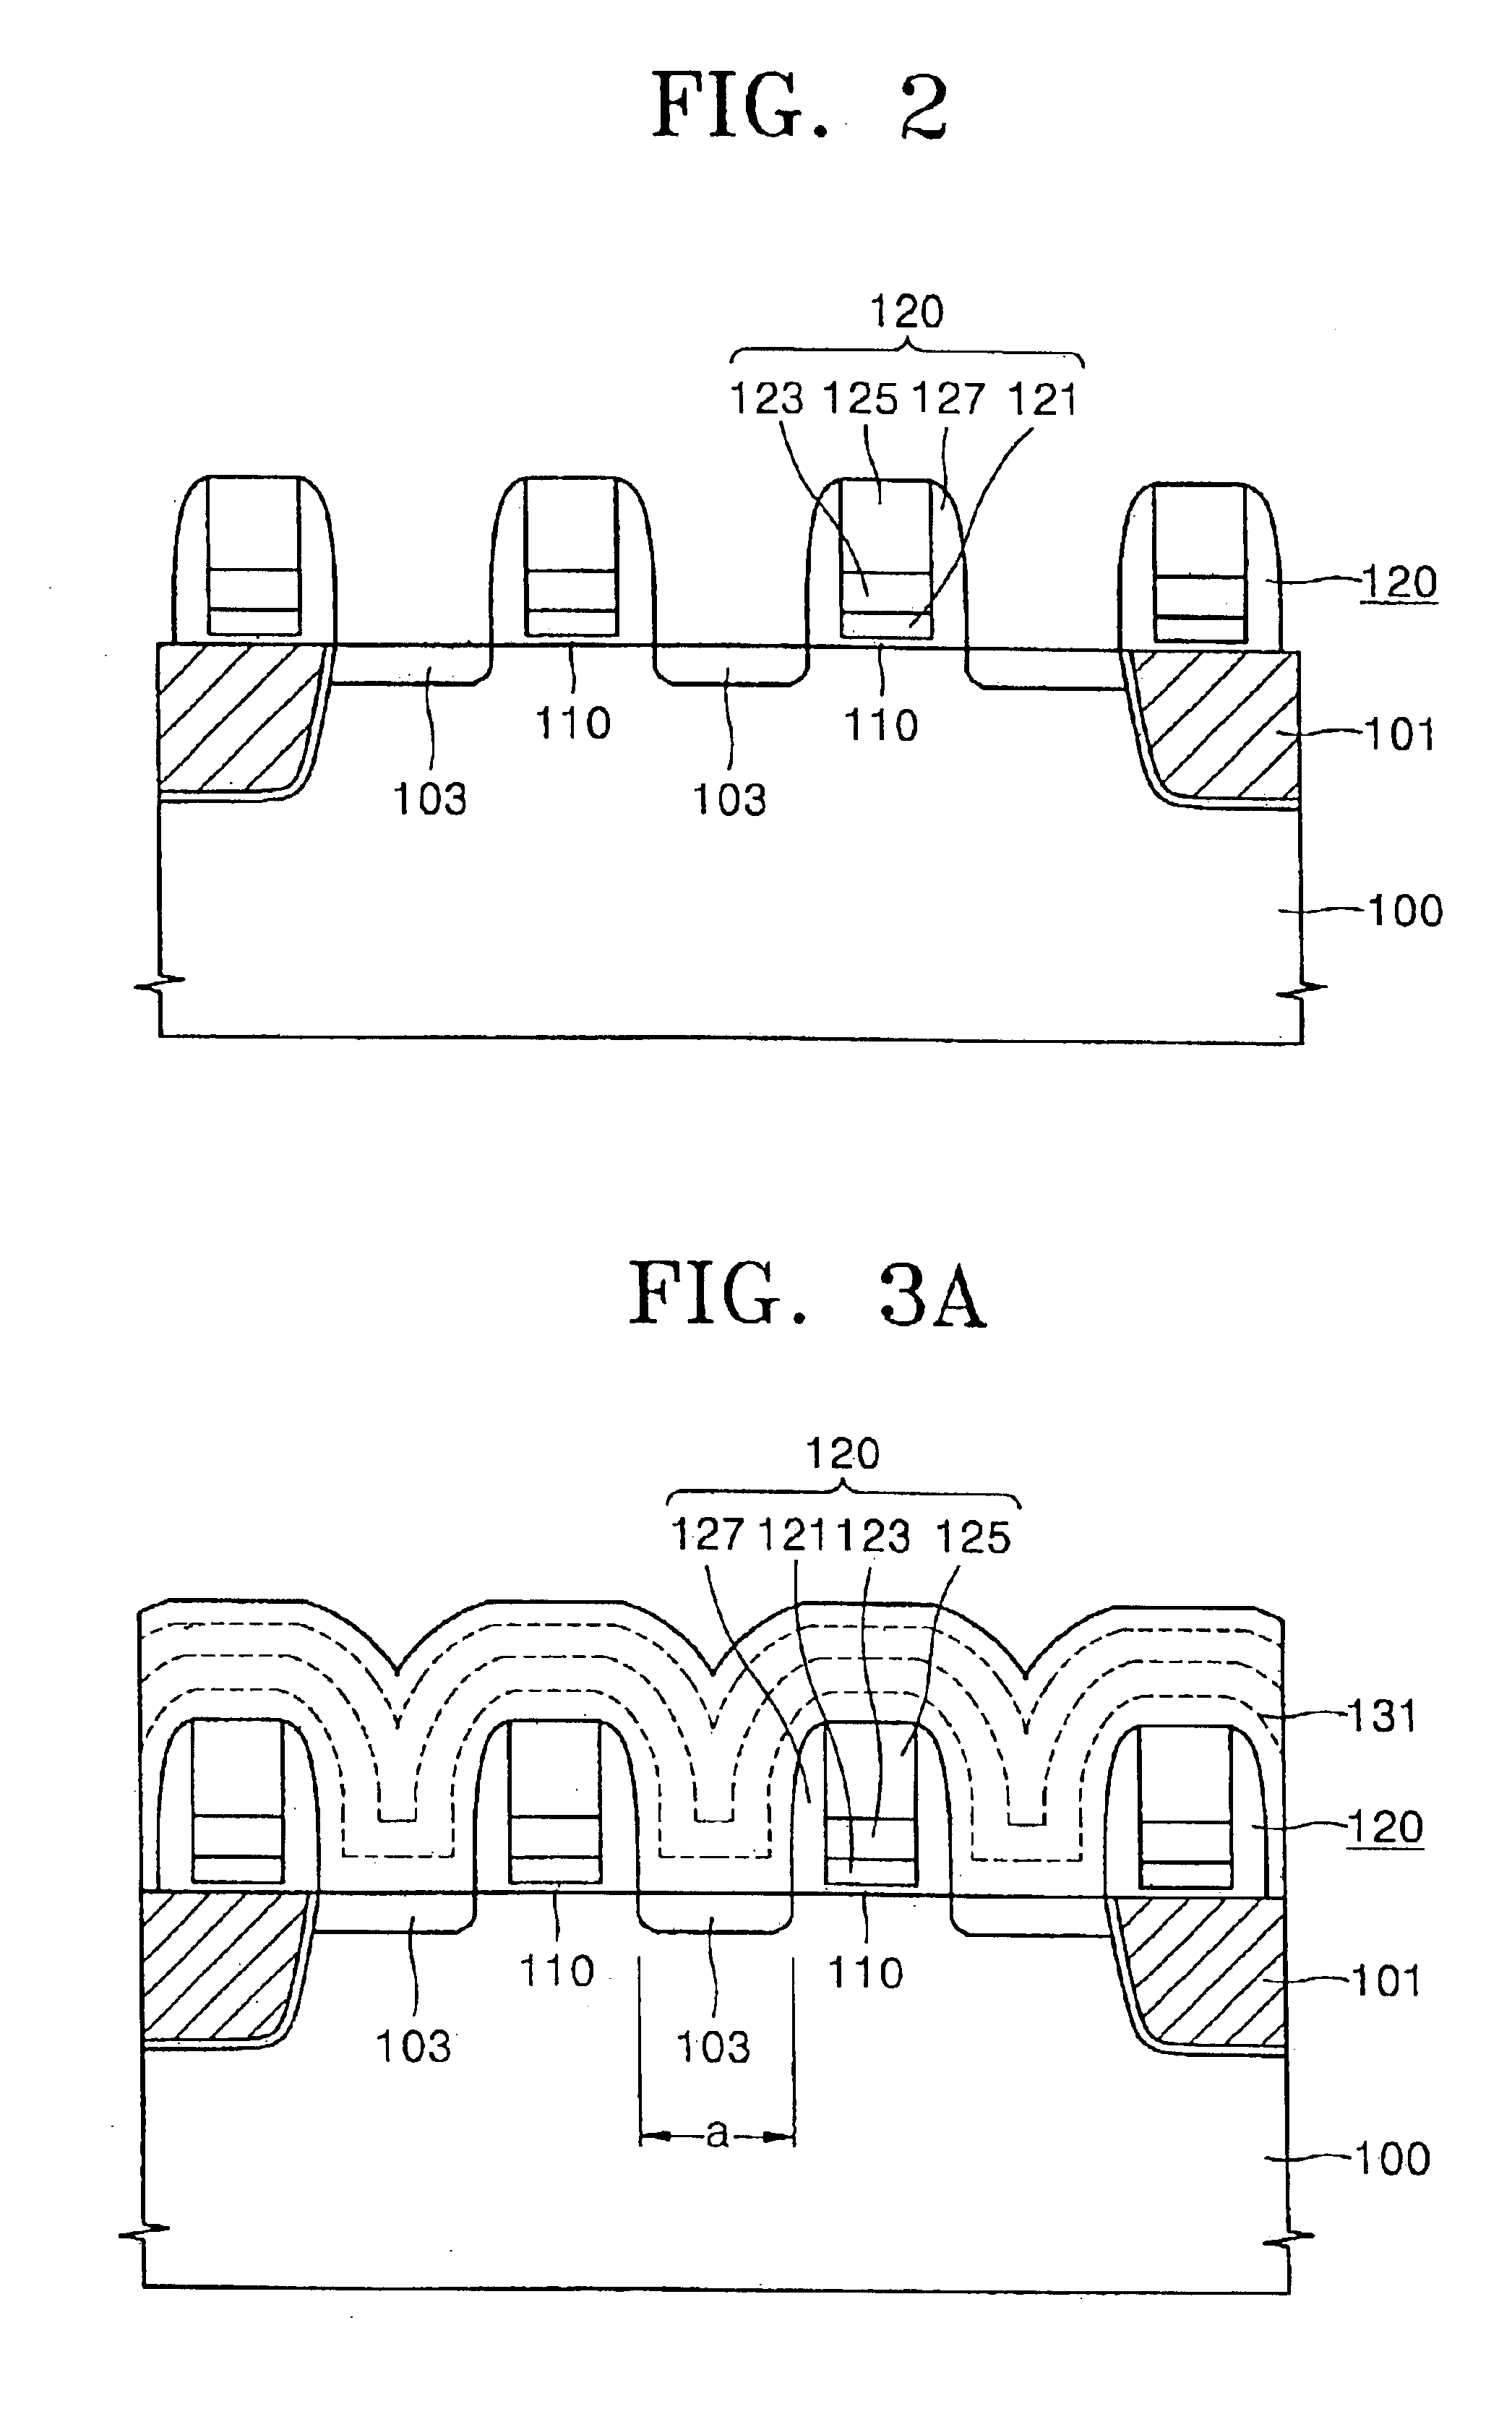 Method for fabricating semiconductor device and forming interlayer dielectric film using high-density plasma